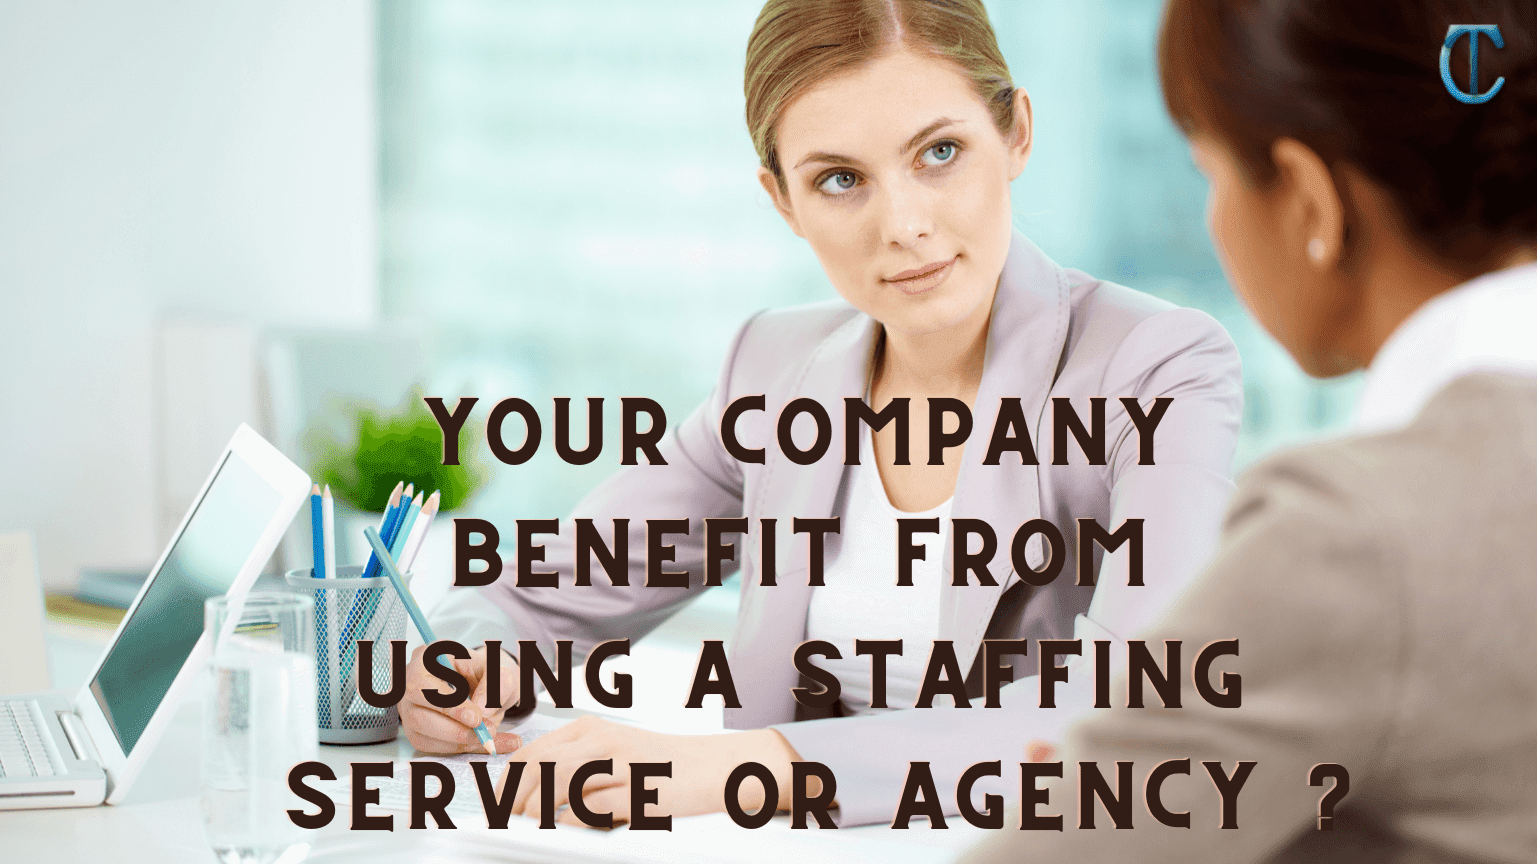 How would your company benefit from using a Staffing Service or Agency?